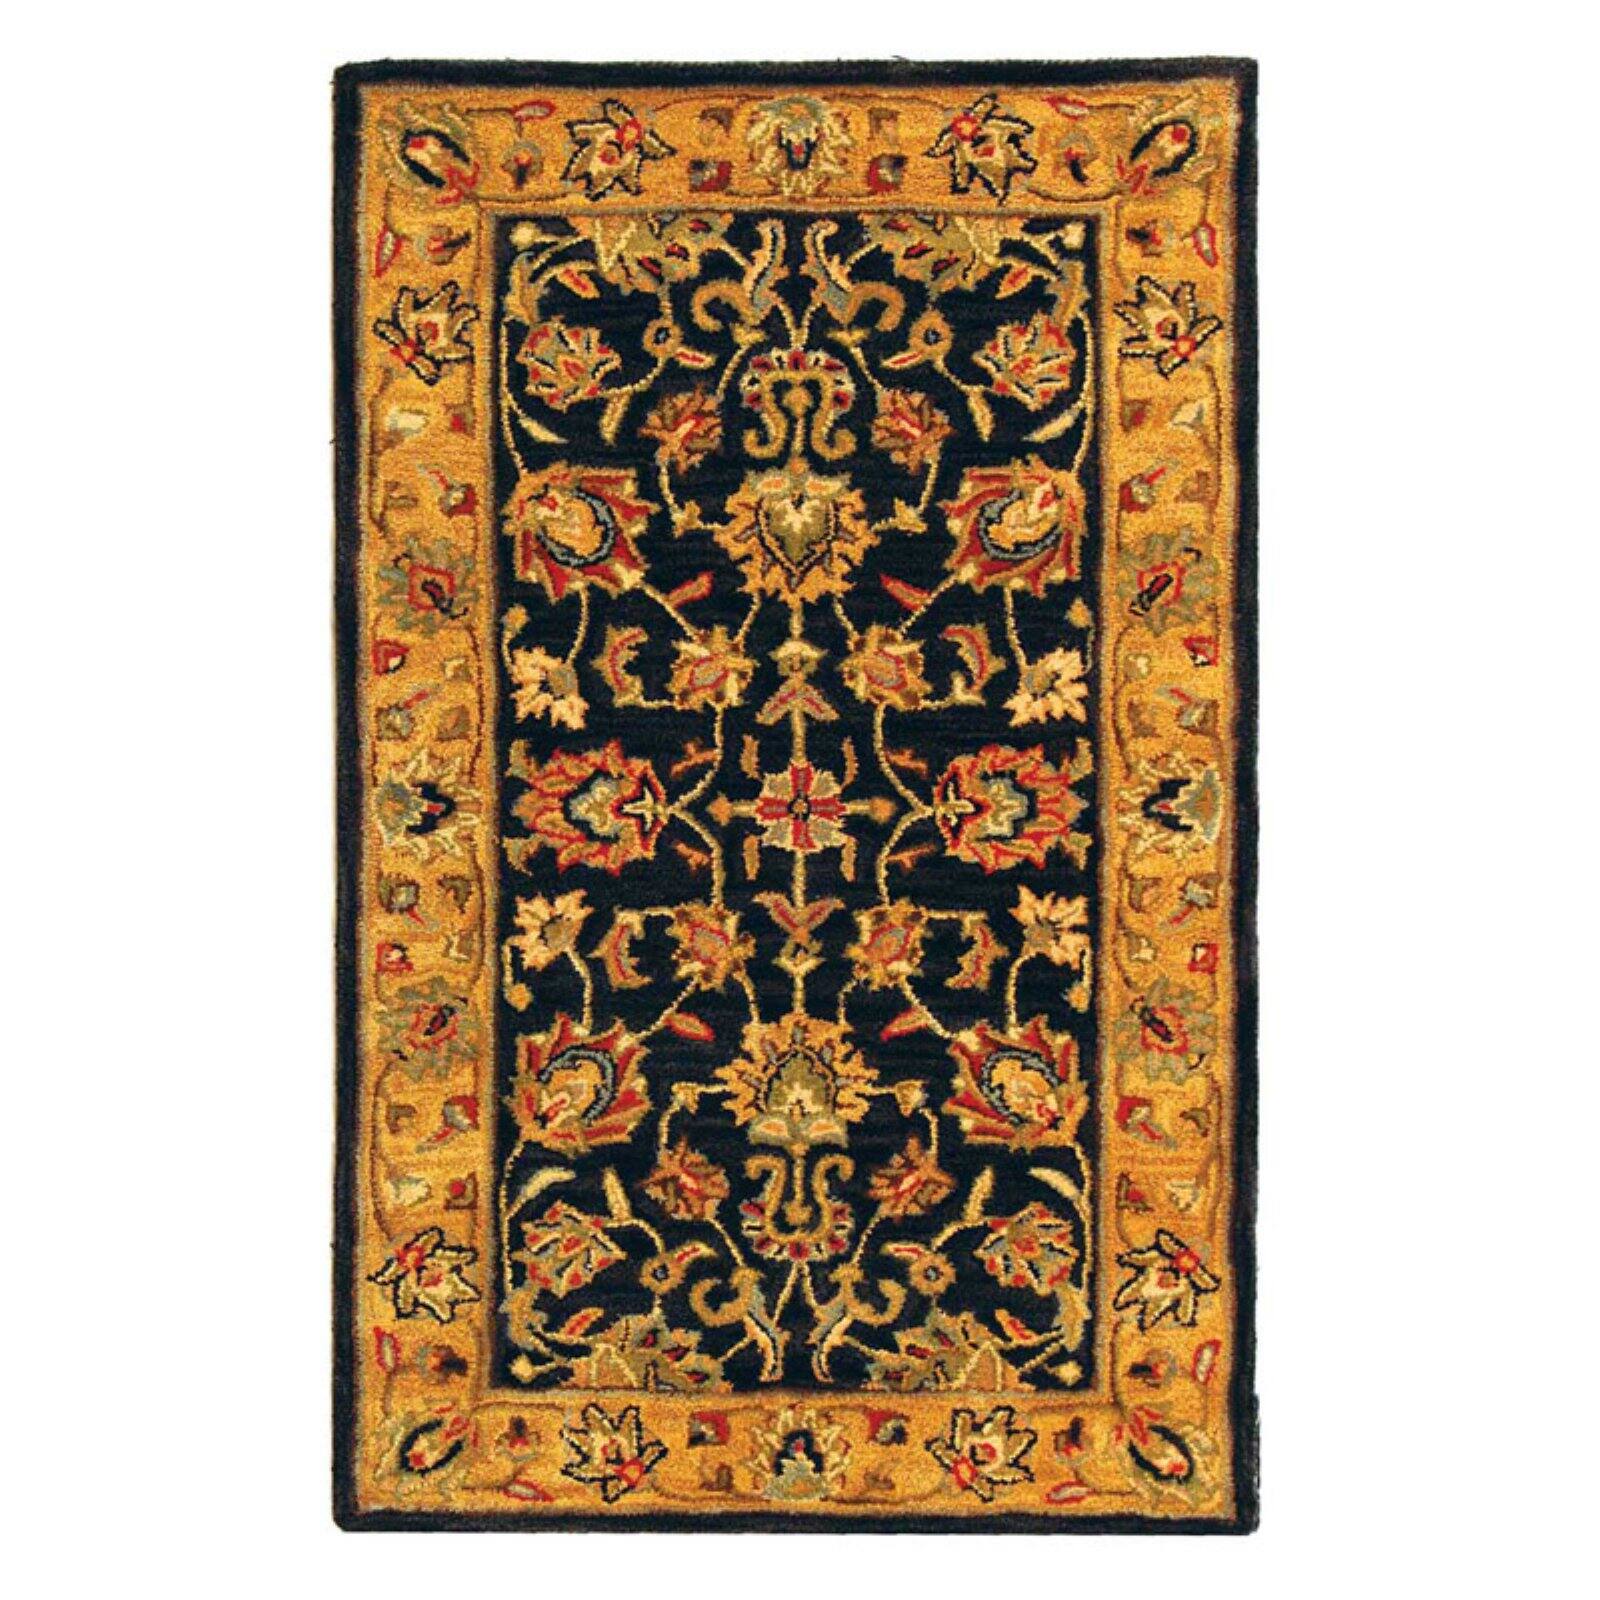 SAFAVIEH Heritage Regis Traditional Wool Area Rug, Charcoal/Gold, 5' x 8' - image 5 of 10